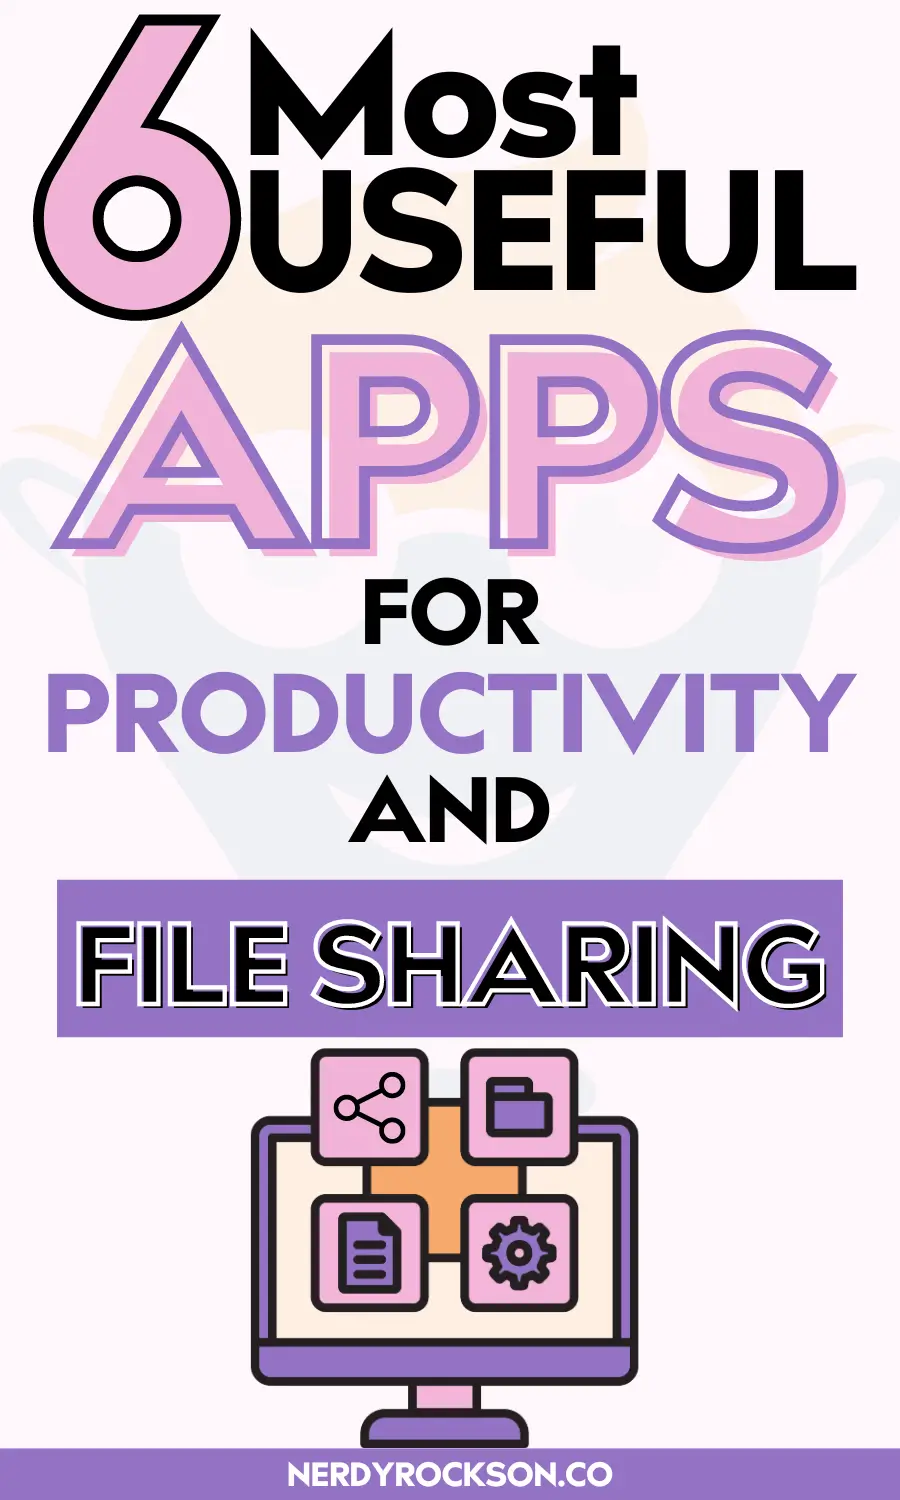 Top 6 Most Useful Apps for Productivity and File Sharing